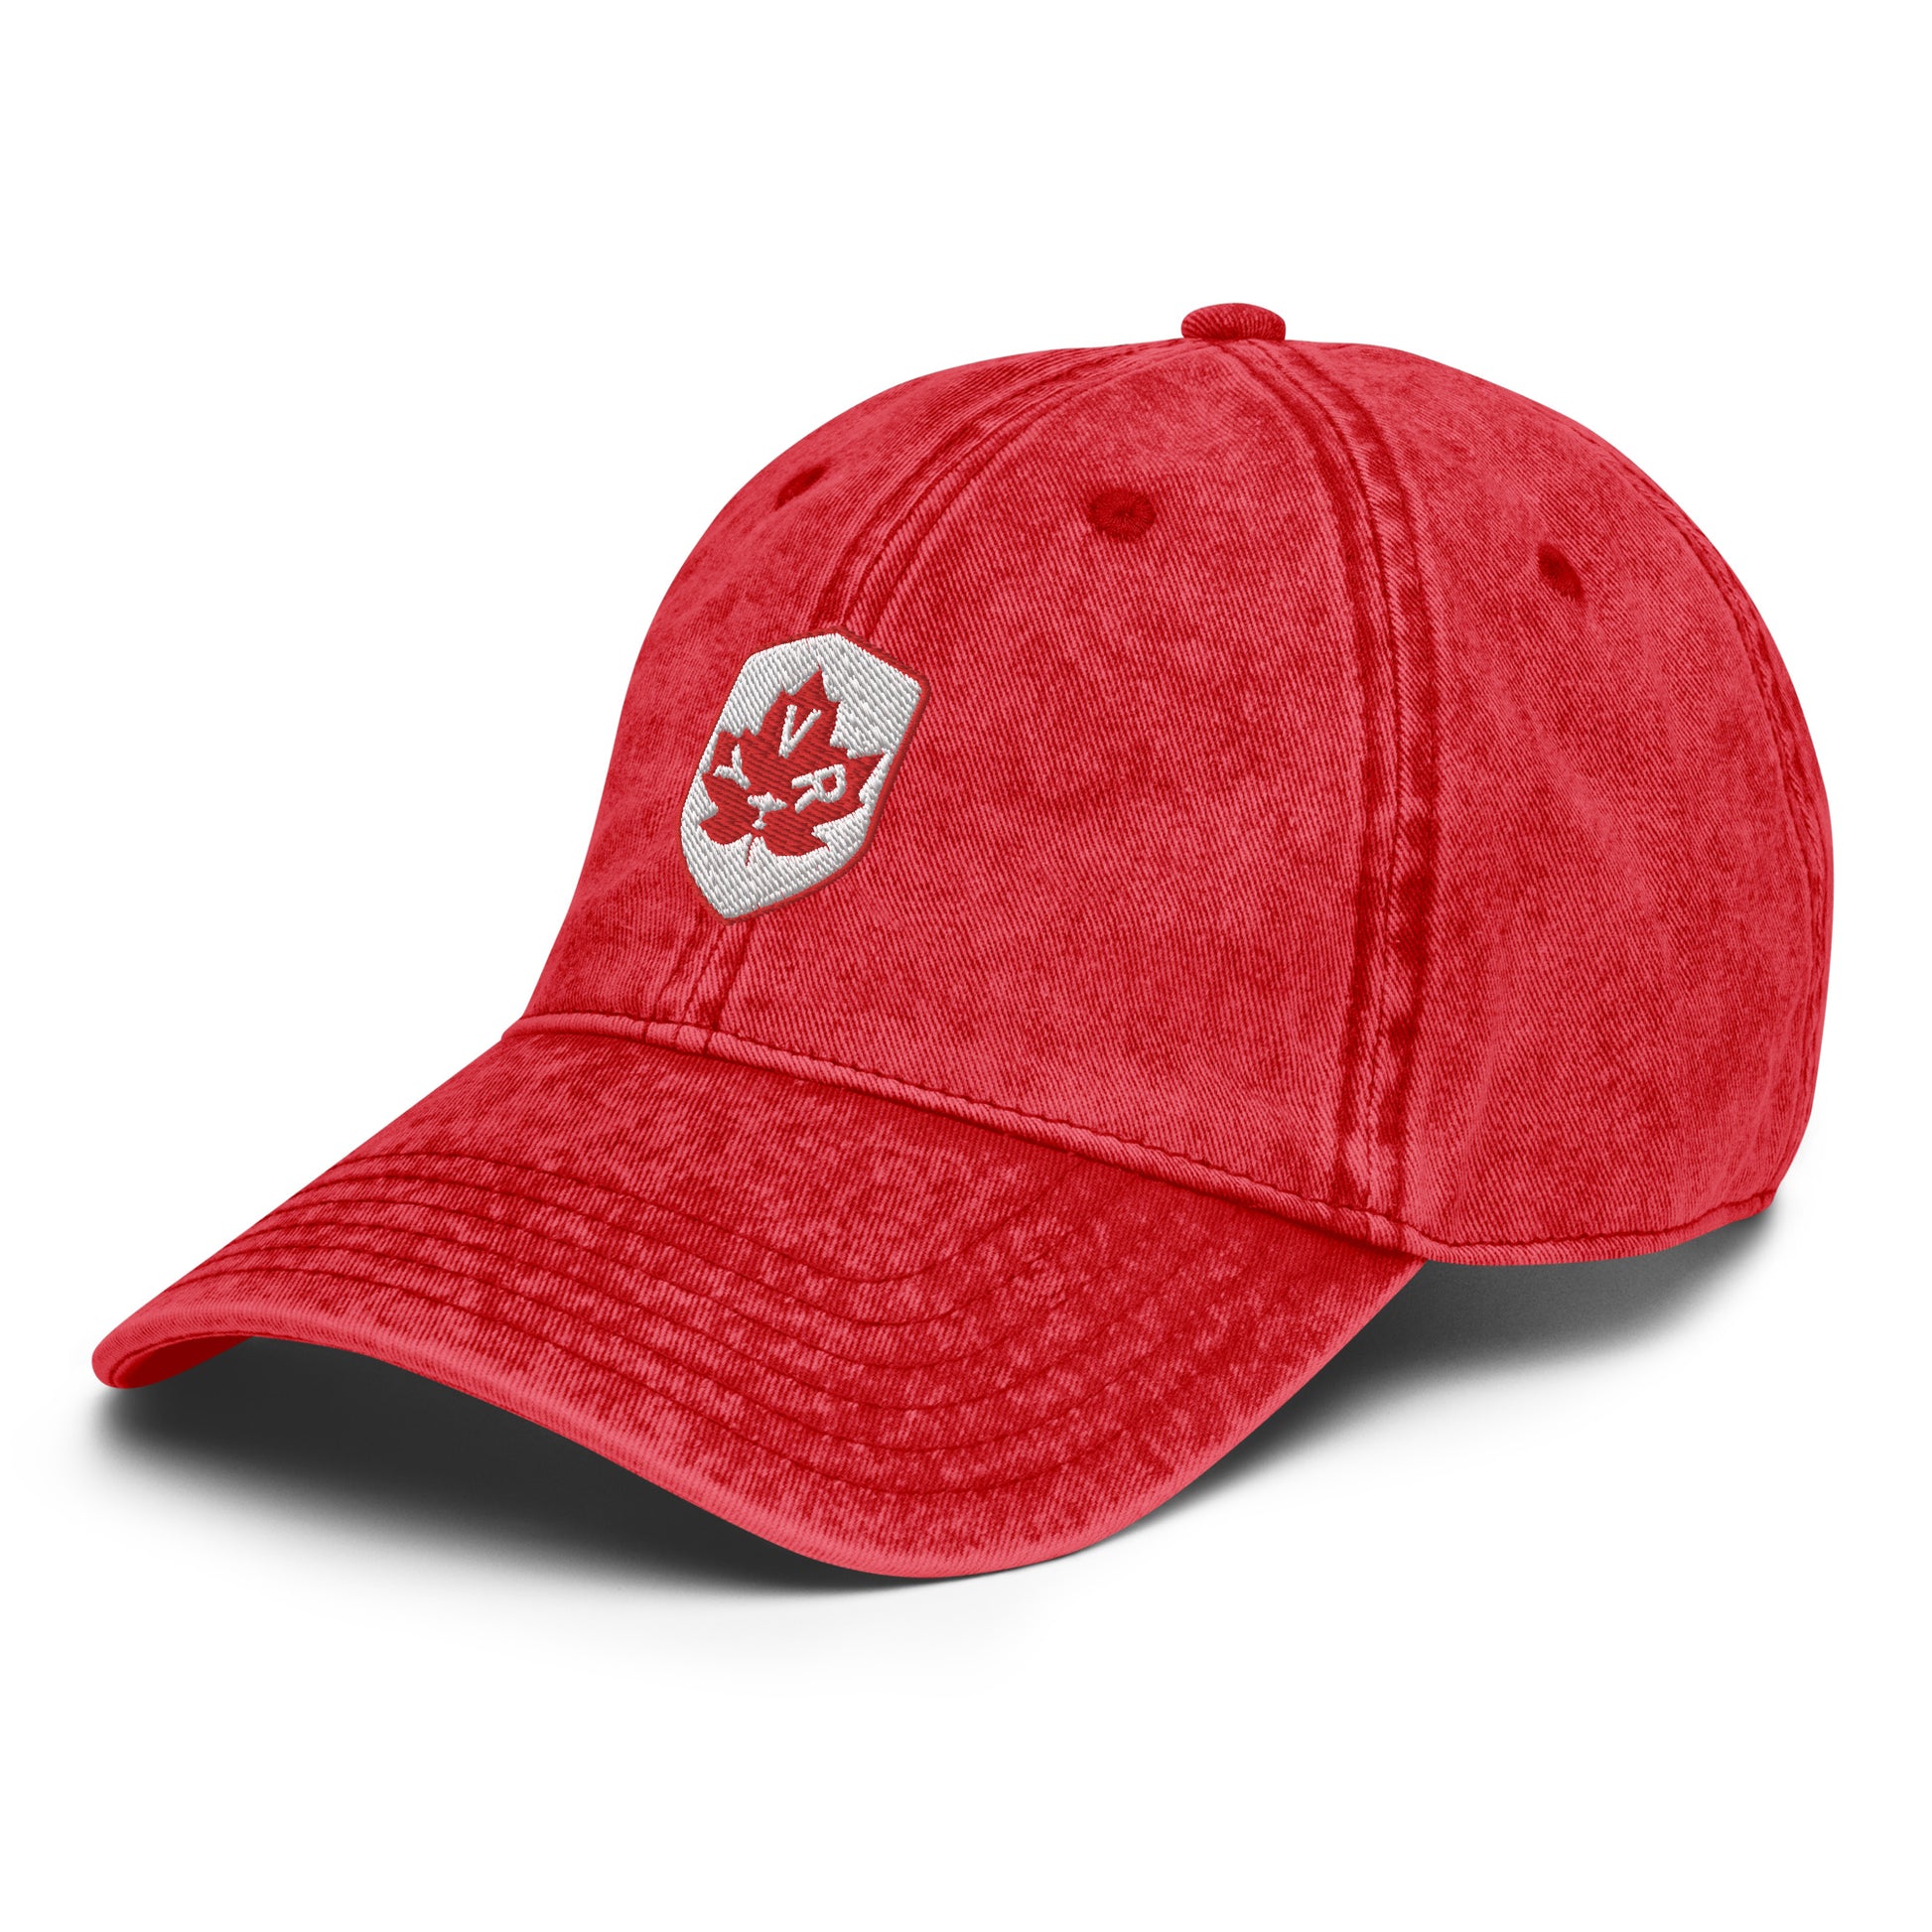 Maple Leaf Twill Cap - Red/White • YVR Vancouver • YHM Designs - Image 20